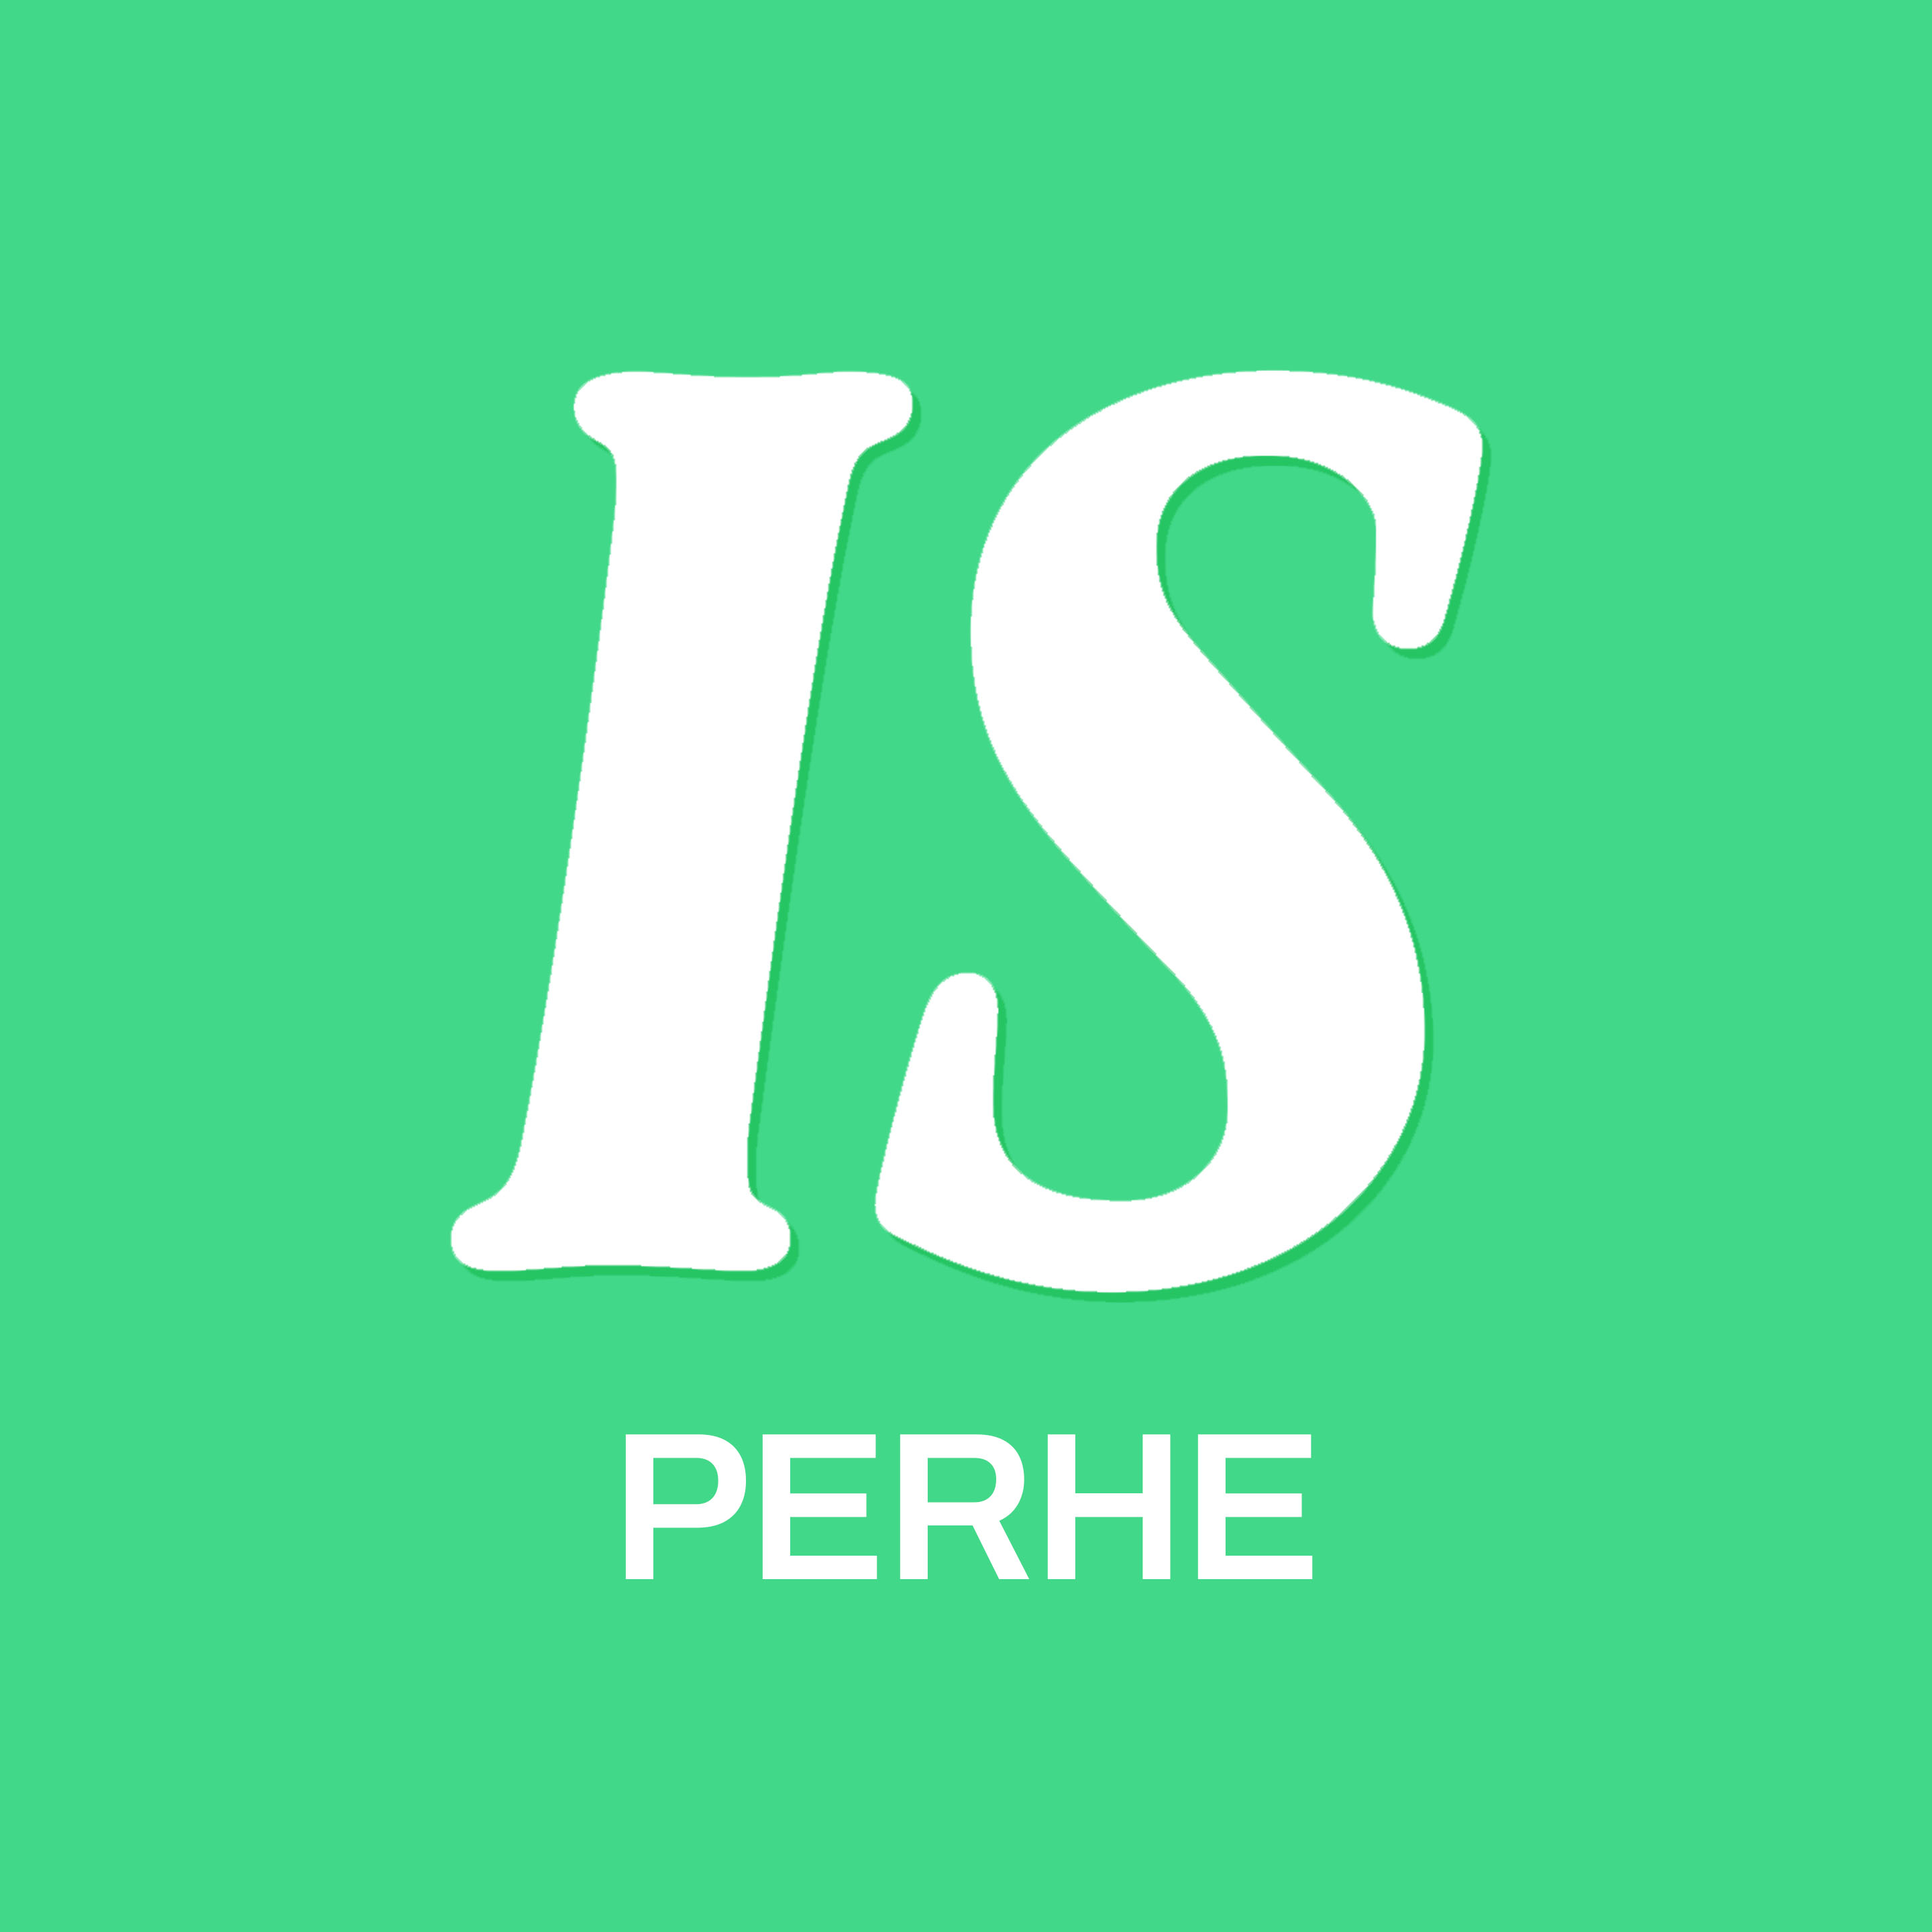 IS PERHE - podcast